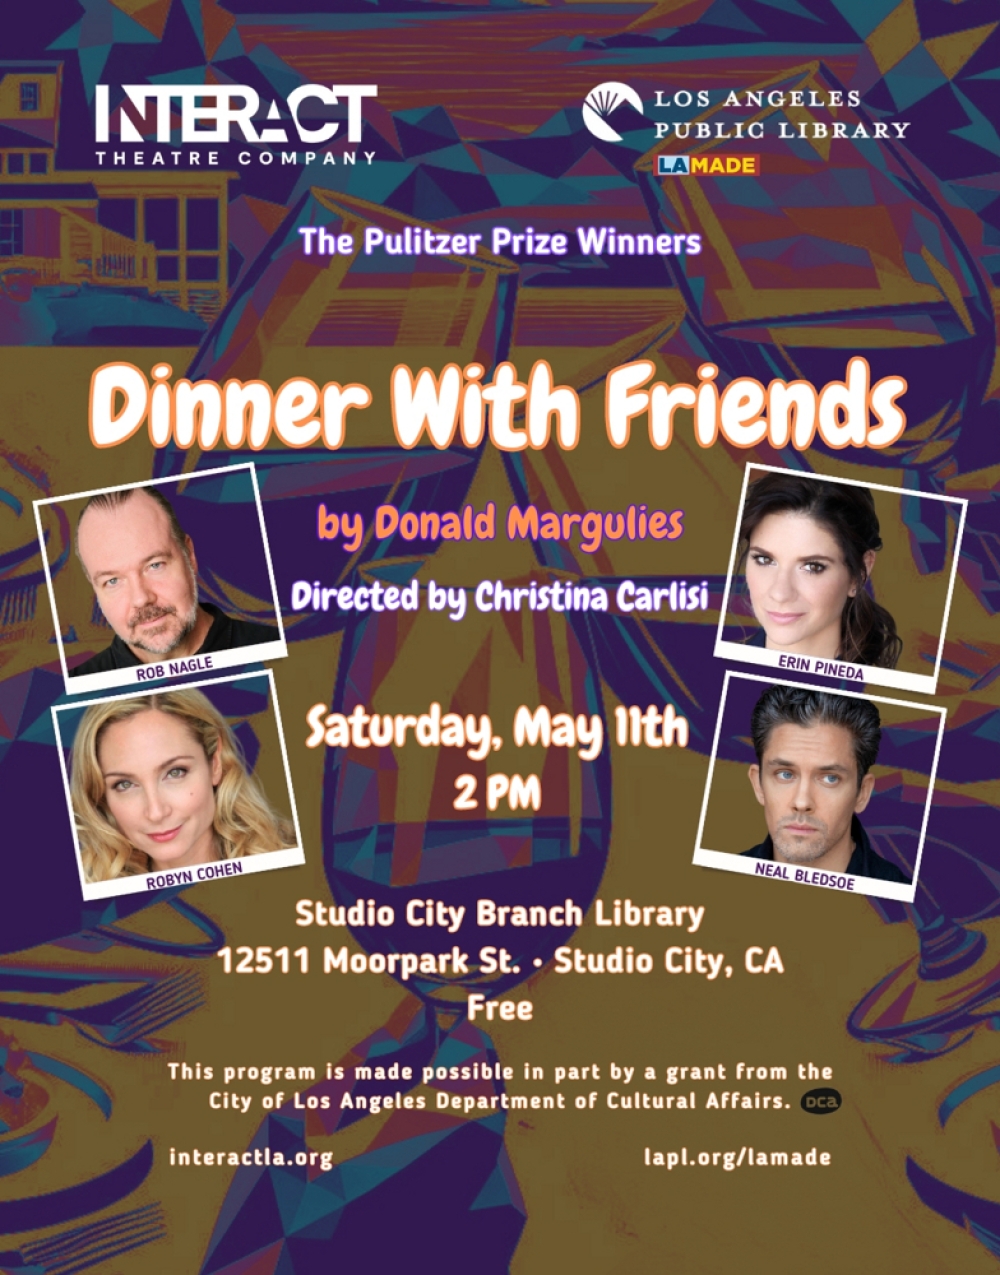 DINNER WITH FRIENDS by Donald Margulies at INTERACT THEATRE COMPANY